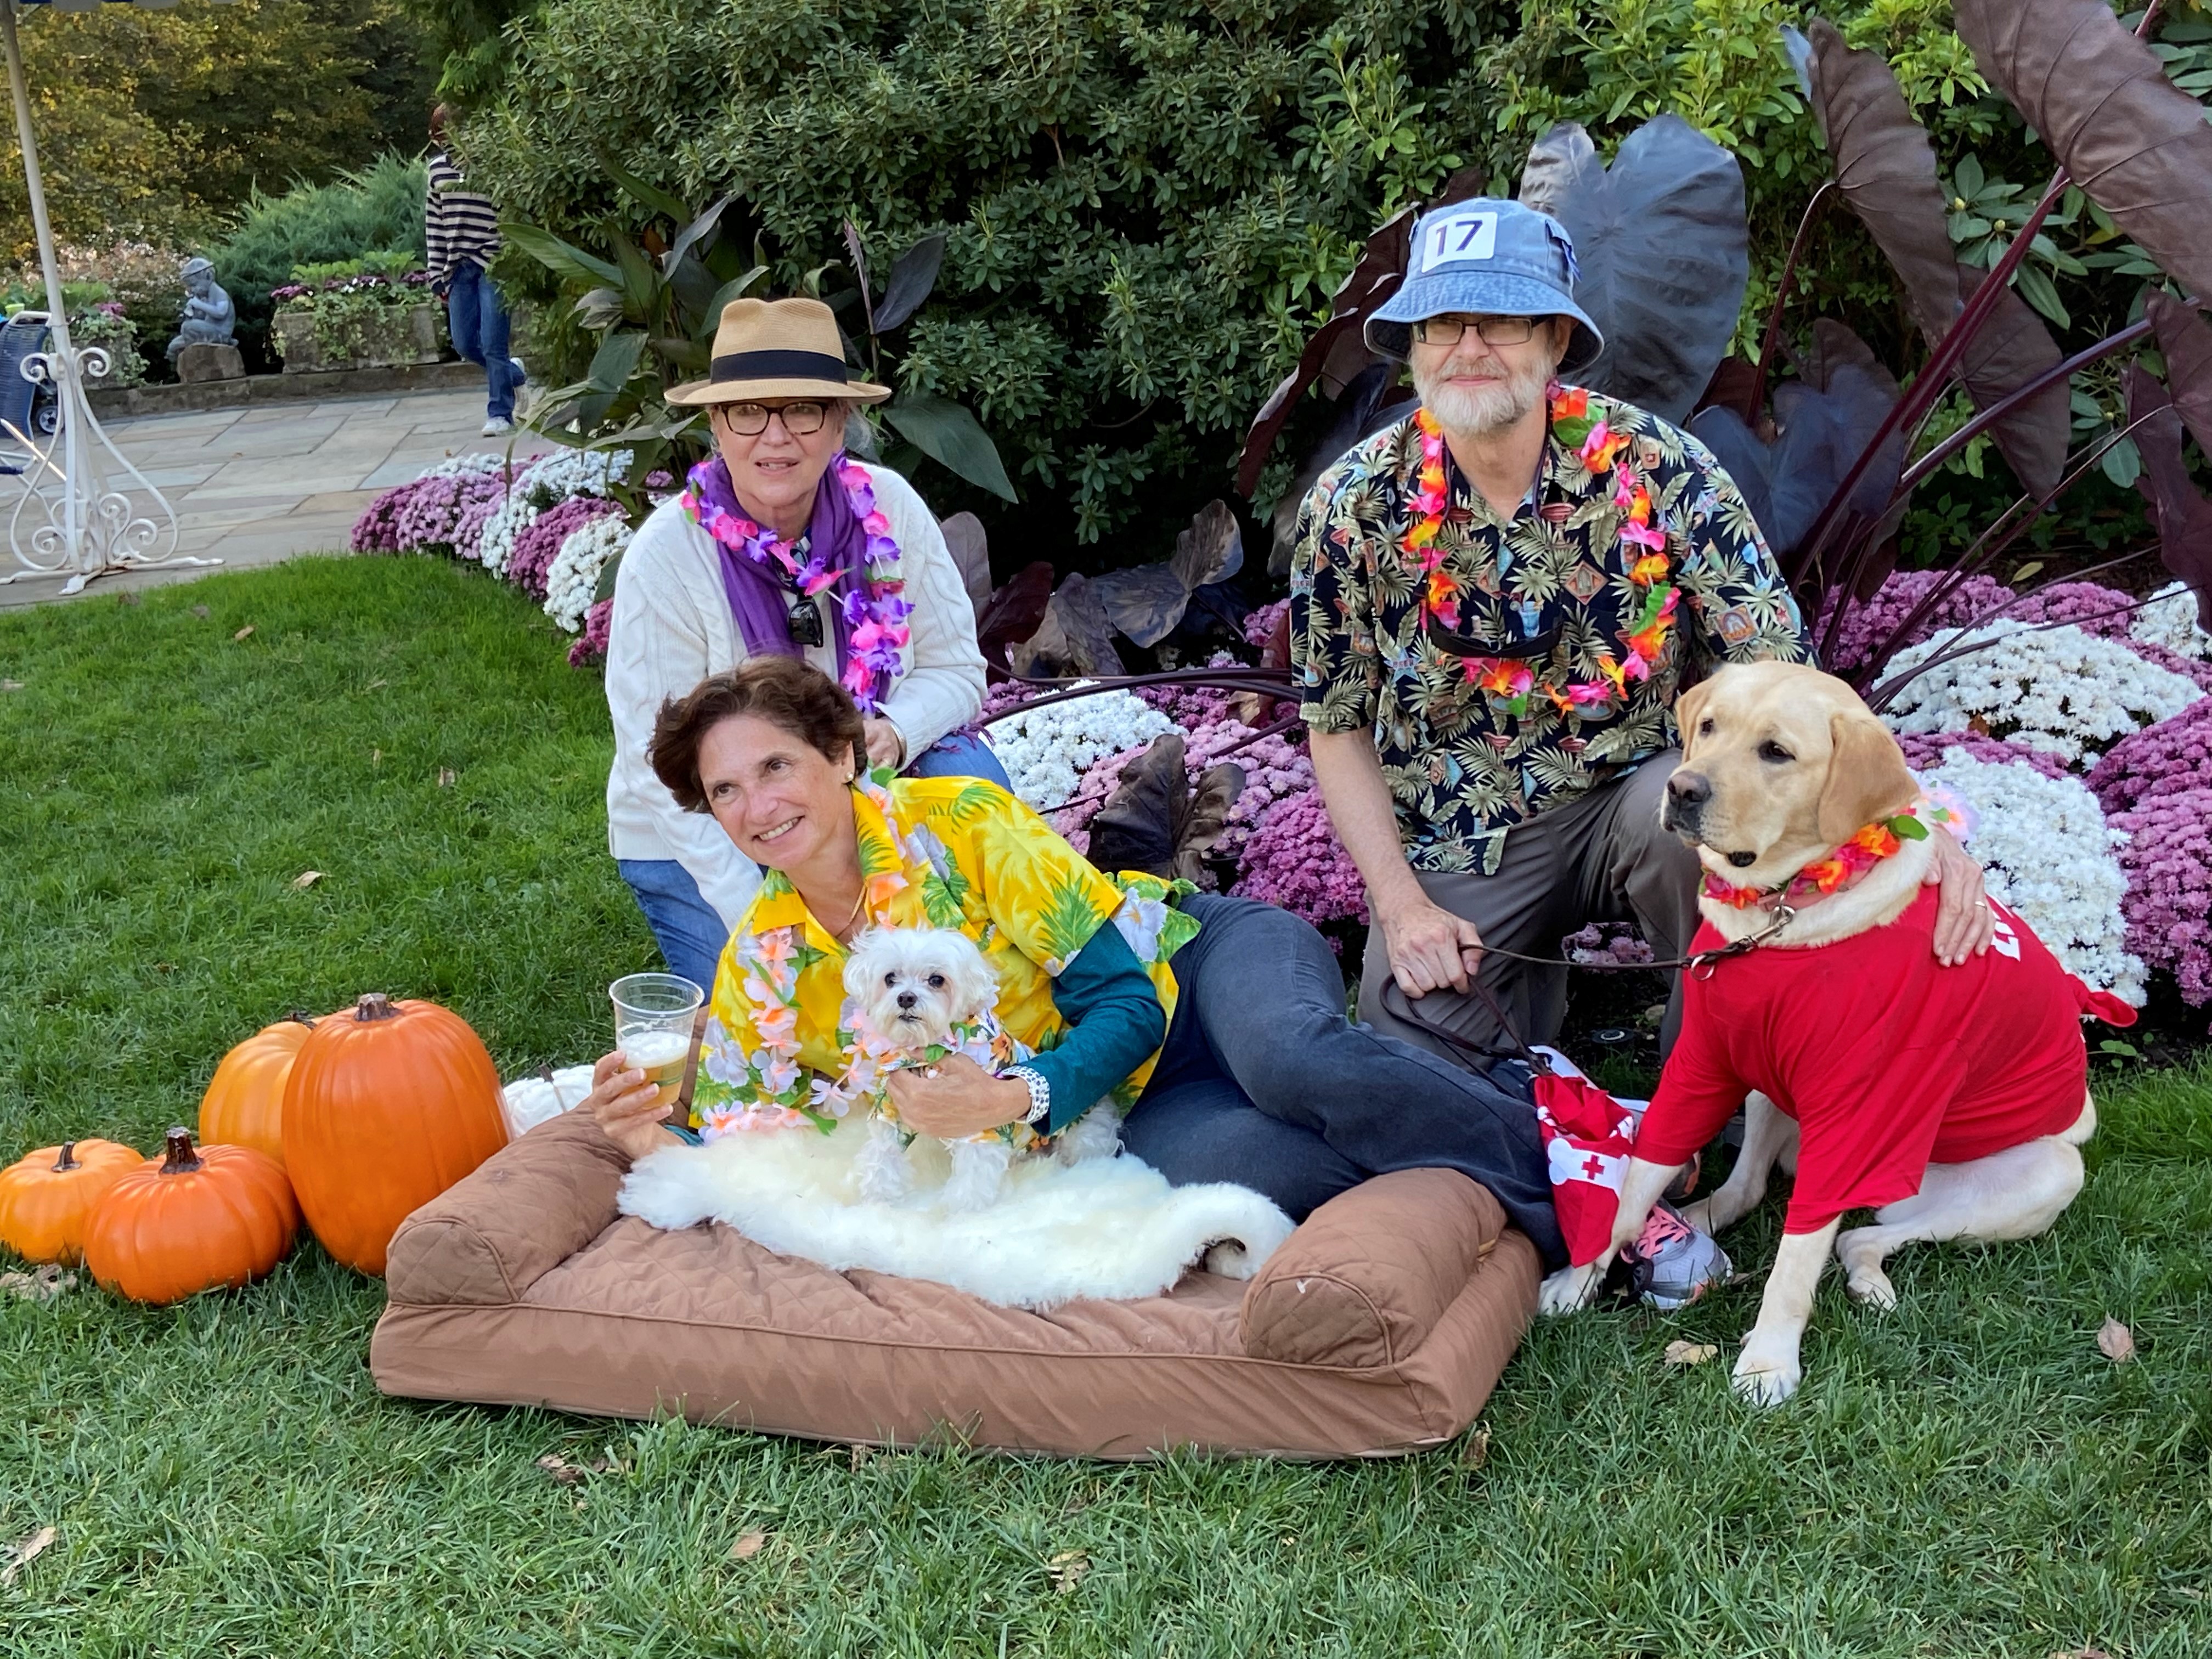 Group photo of 3 adults with 2 dogs relaxing on lunar Lawn